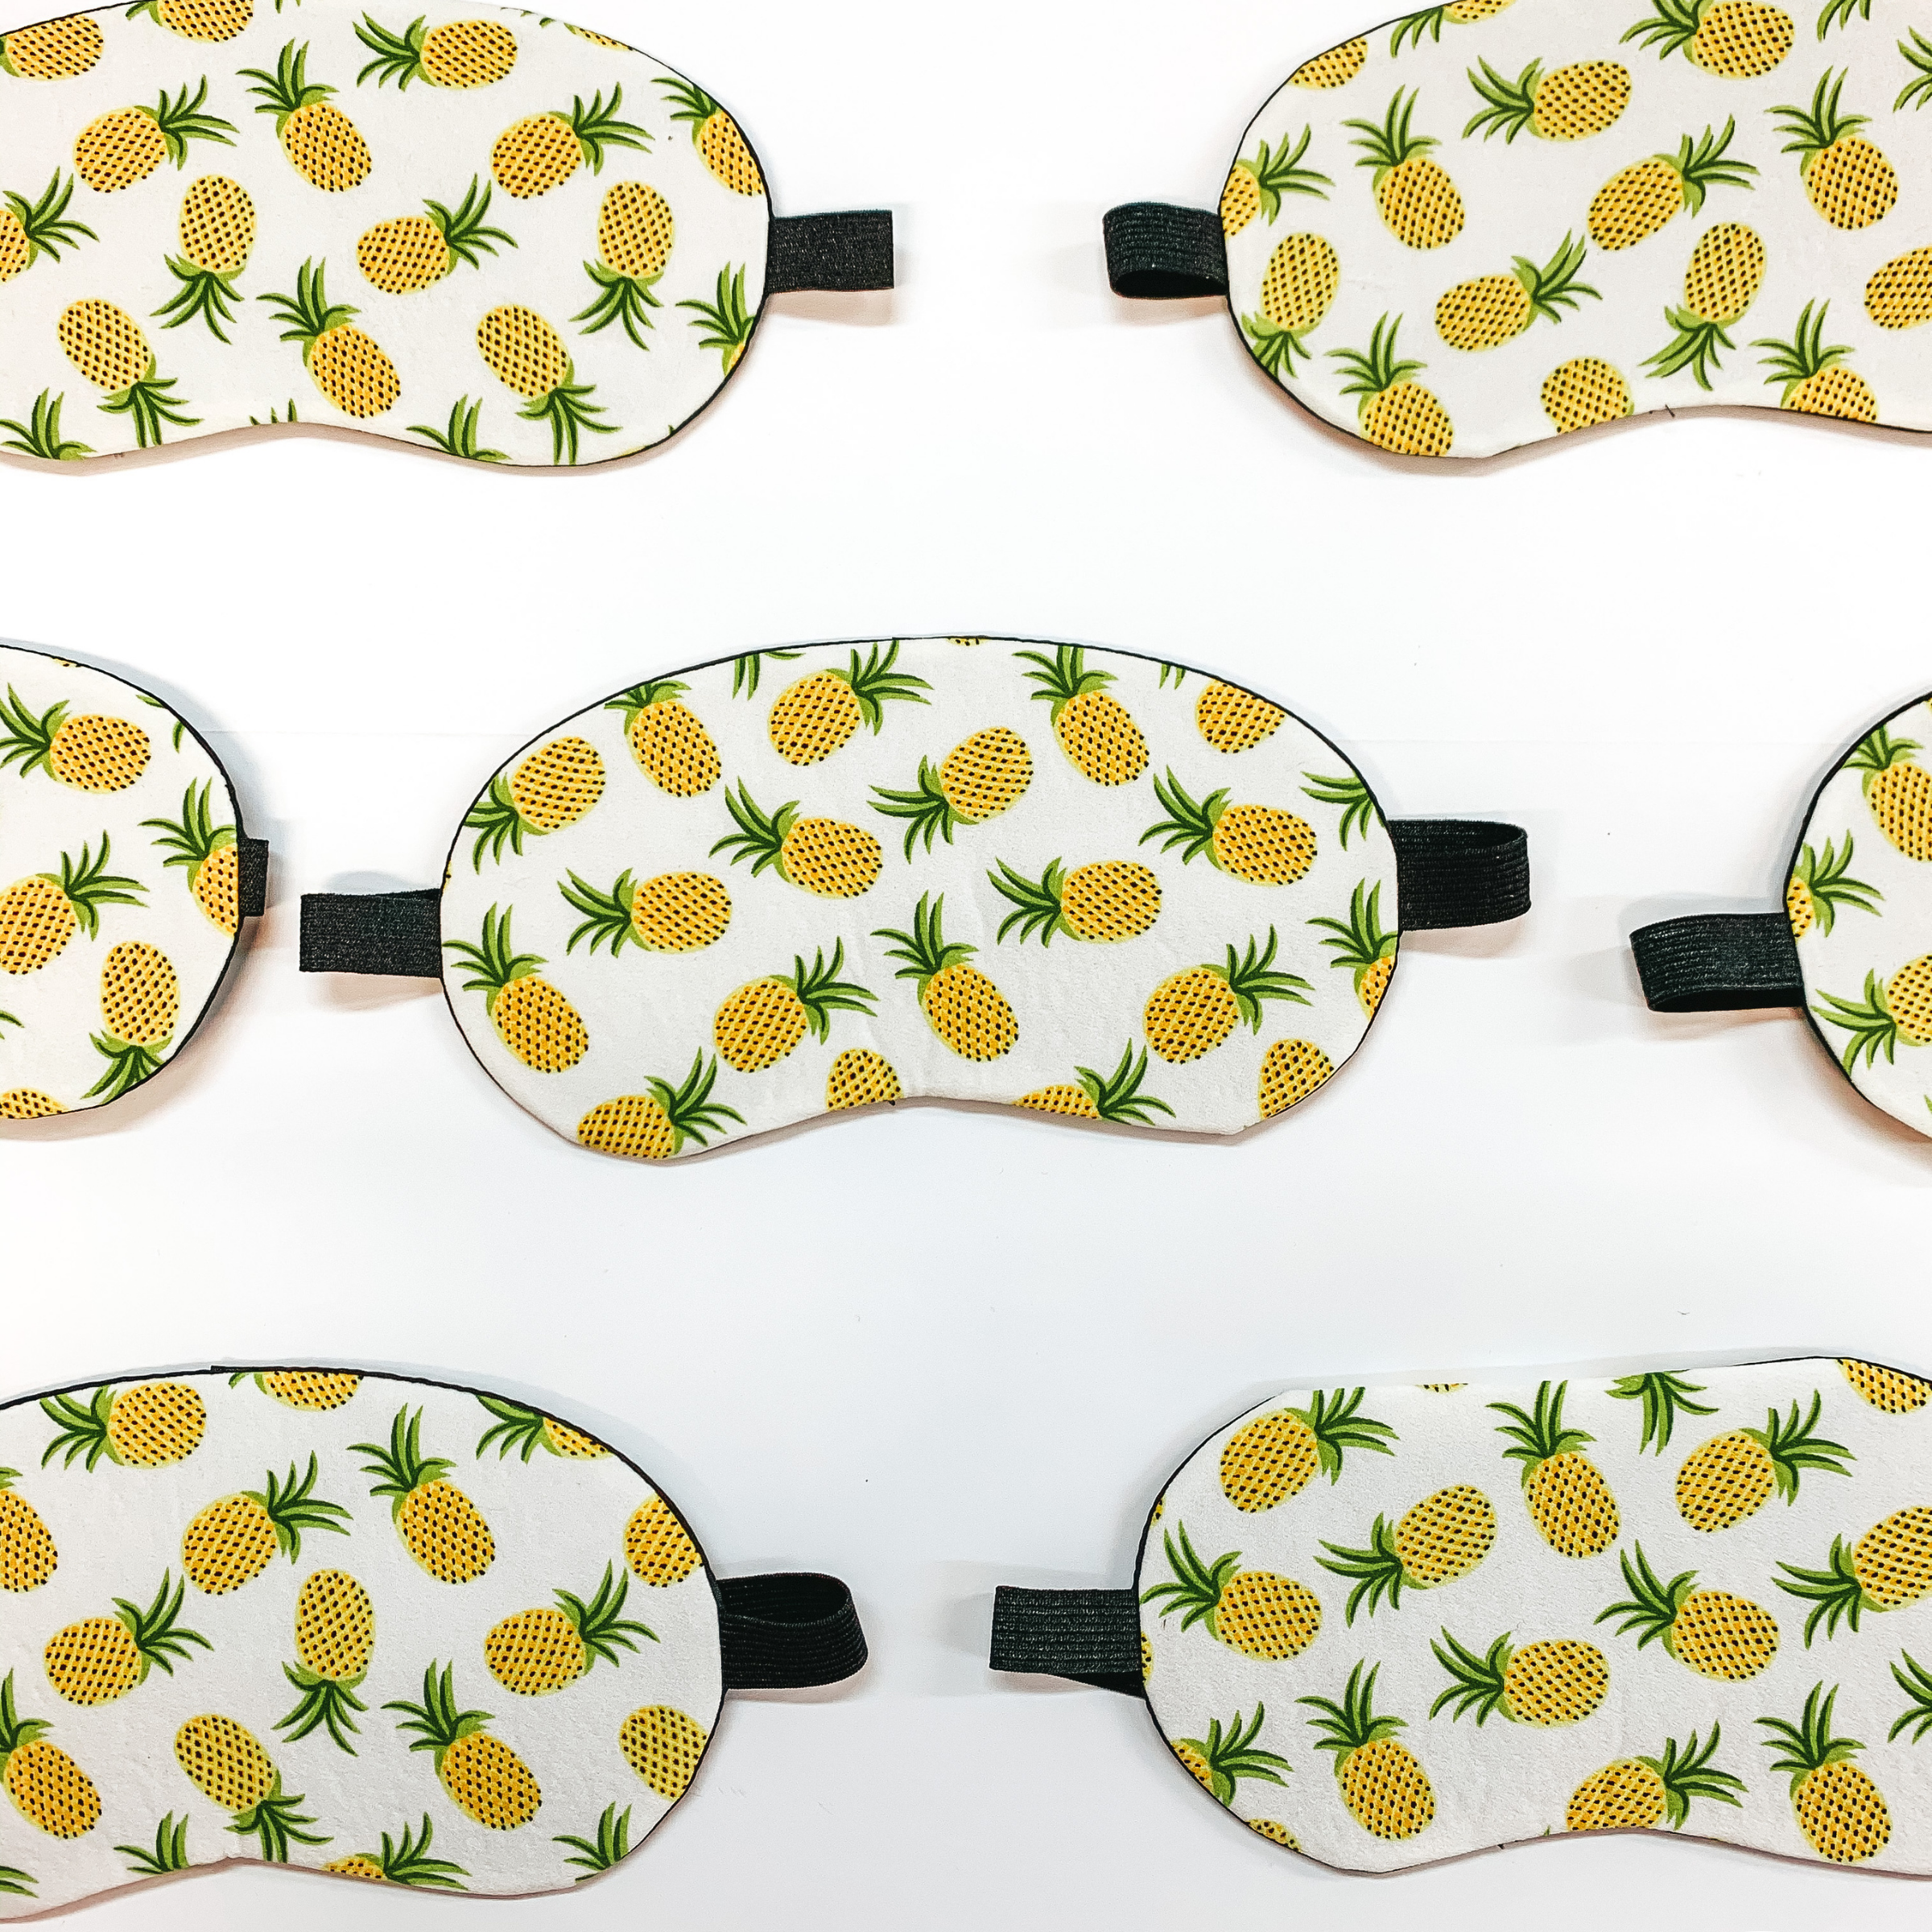 Buy 3 for $10 | Sleep Eye Covers in Assorted Pineapple Prints - Giddy Up Glamour Boutique